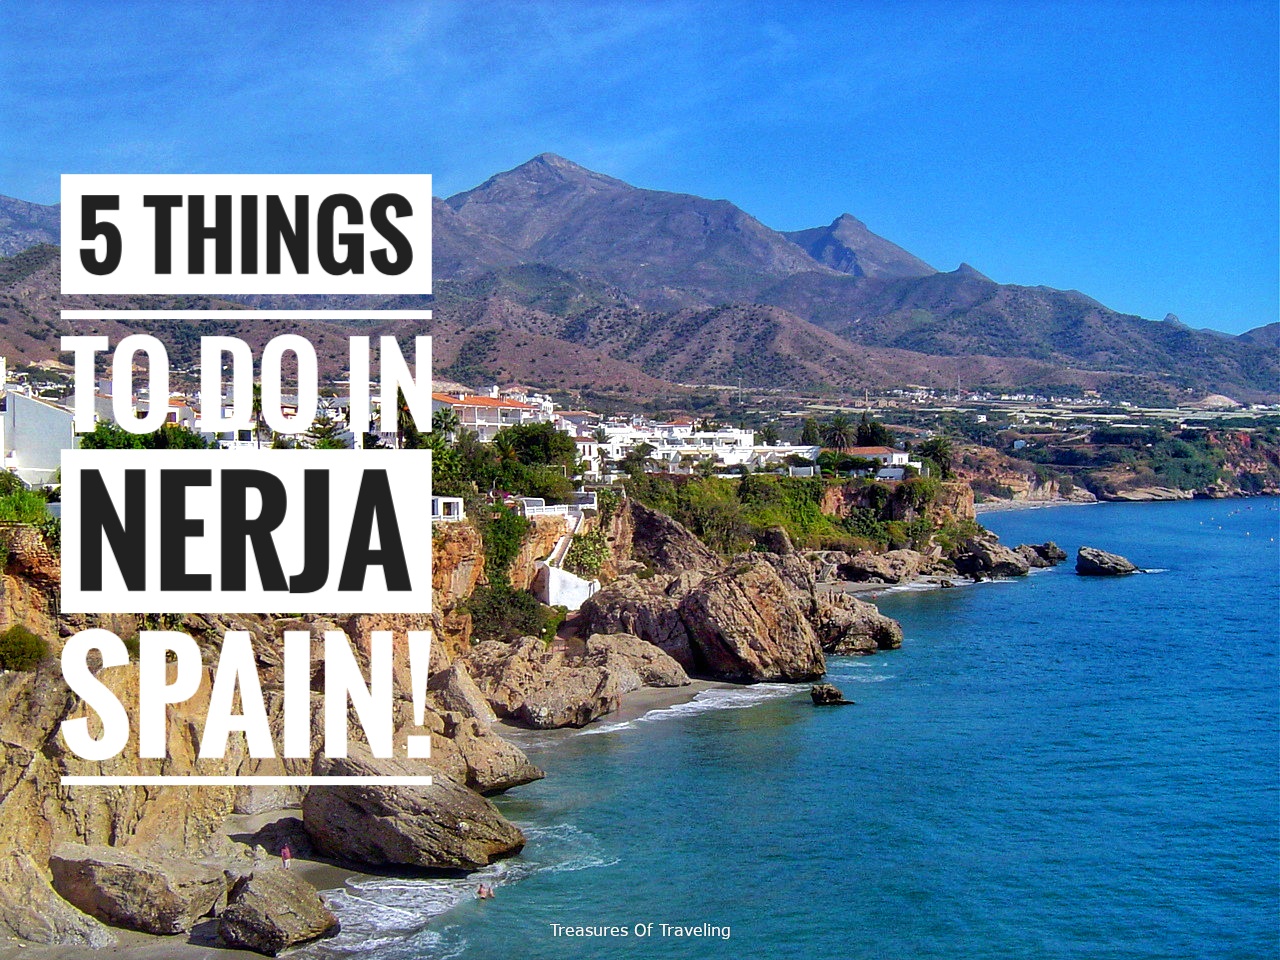 Nerja is a beautiful and charming coastal beach town located along #Spain’s sunny #CostaDelSol. From #beaches along the #MediterraneanCoast to large underground #caves, here are five things to do in #Nerja!